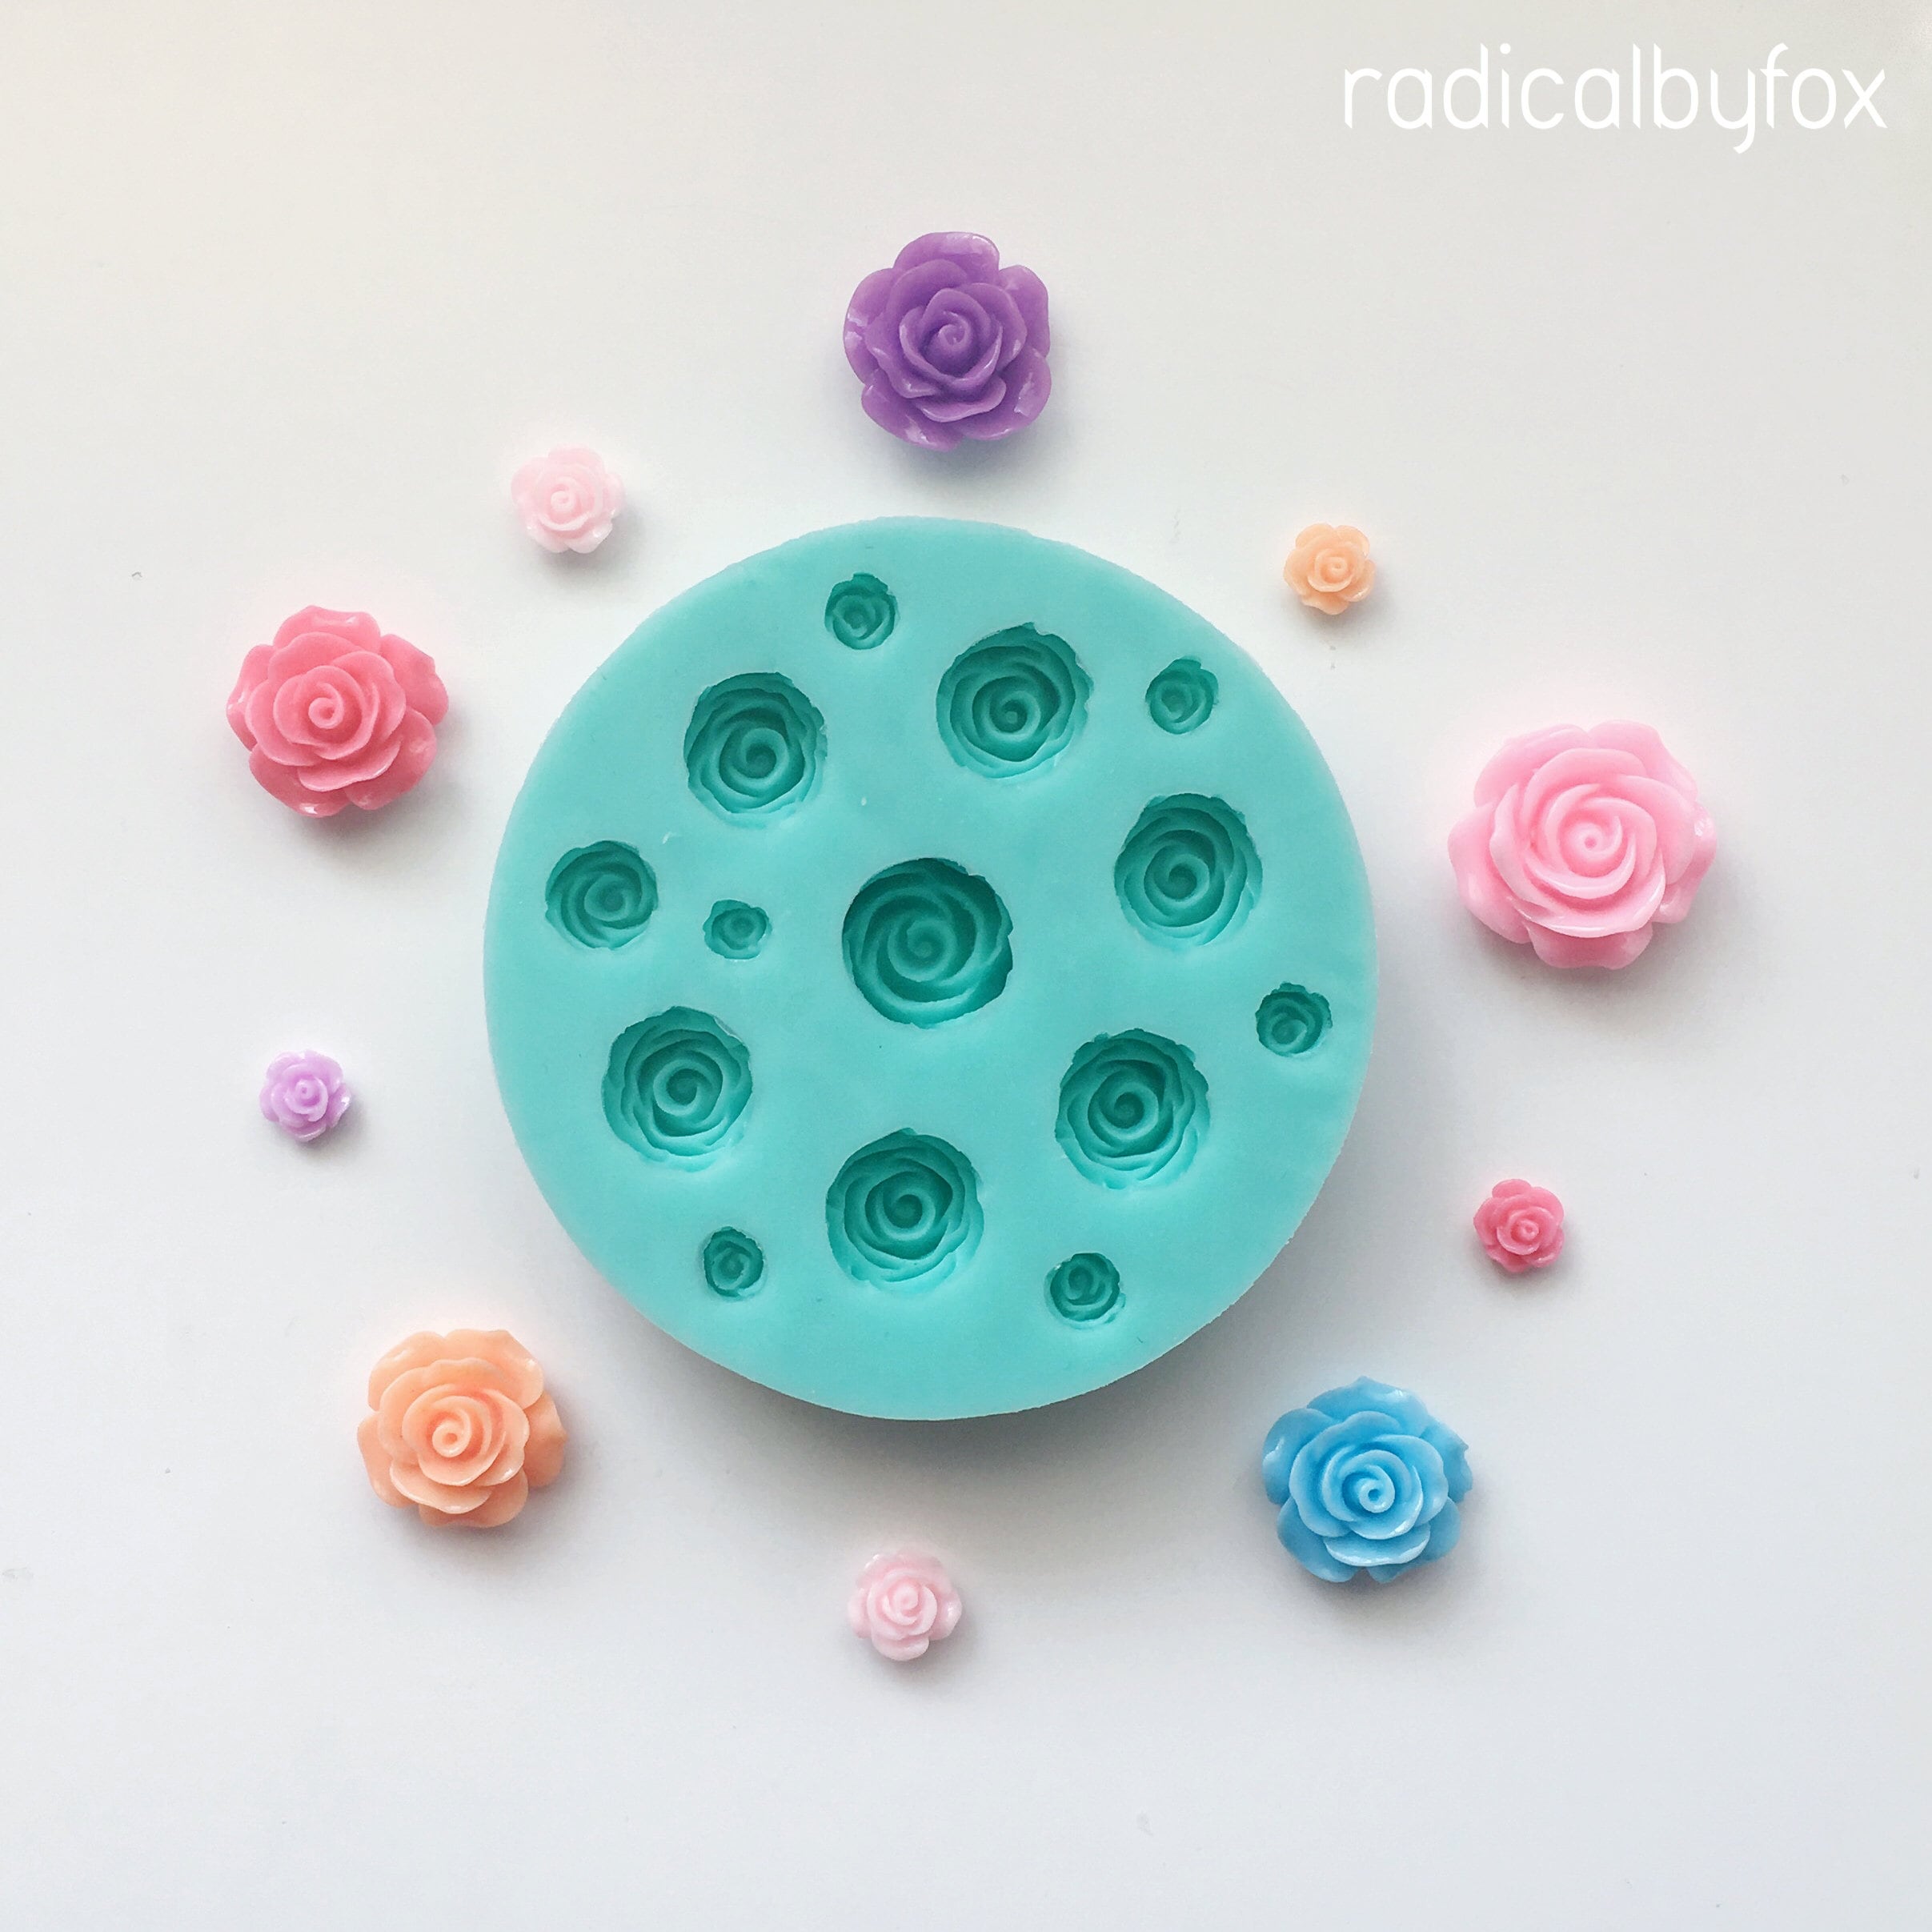 Rose Heart Silicone Cookie Mold – Artesão Cookie Molds